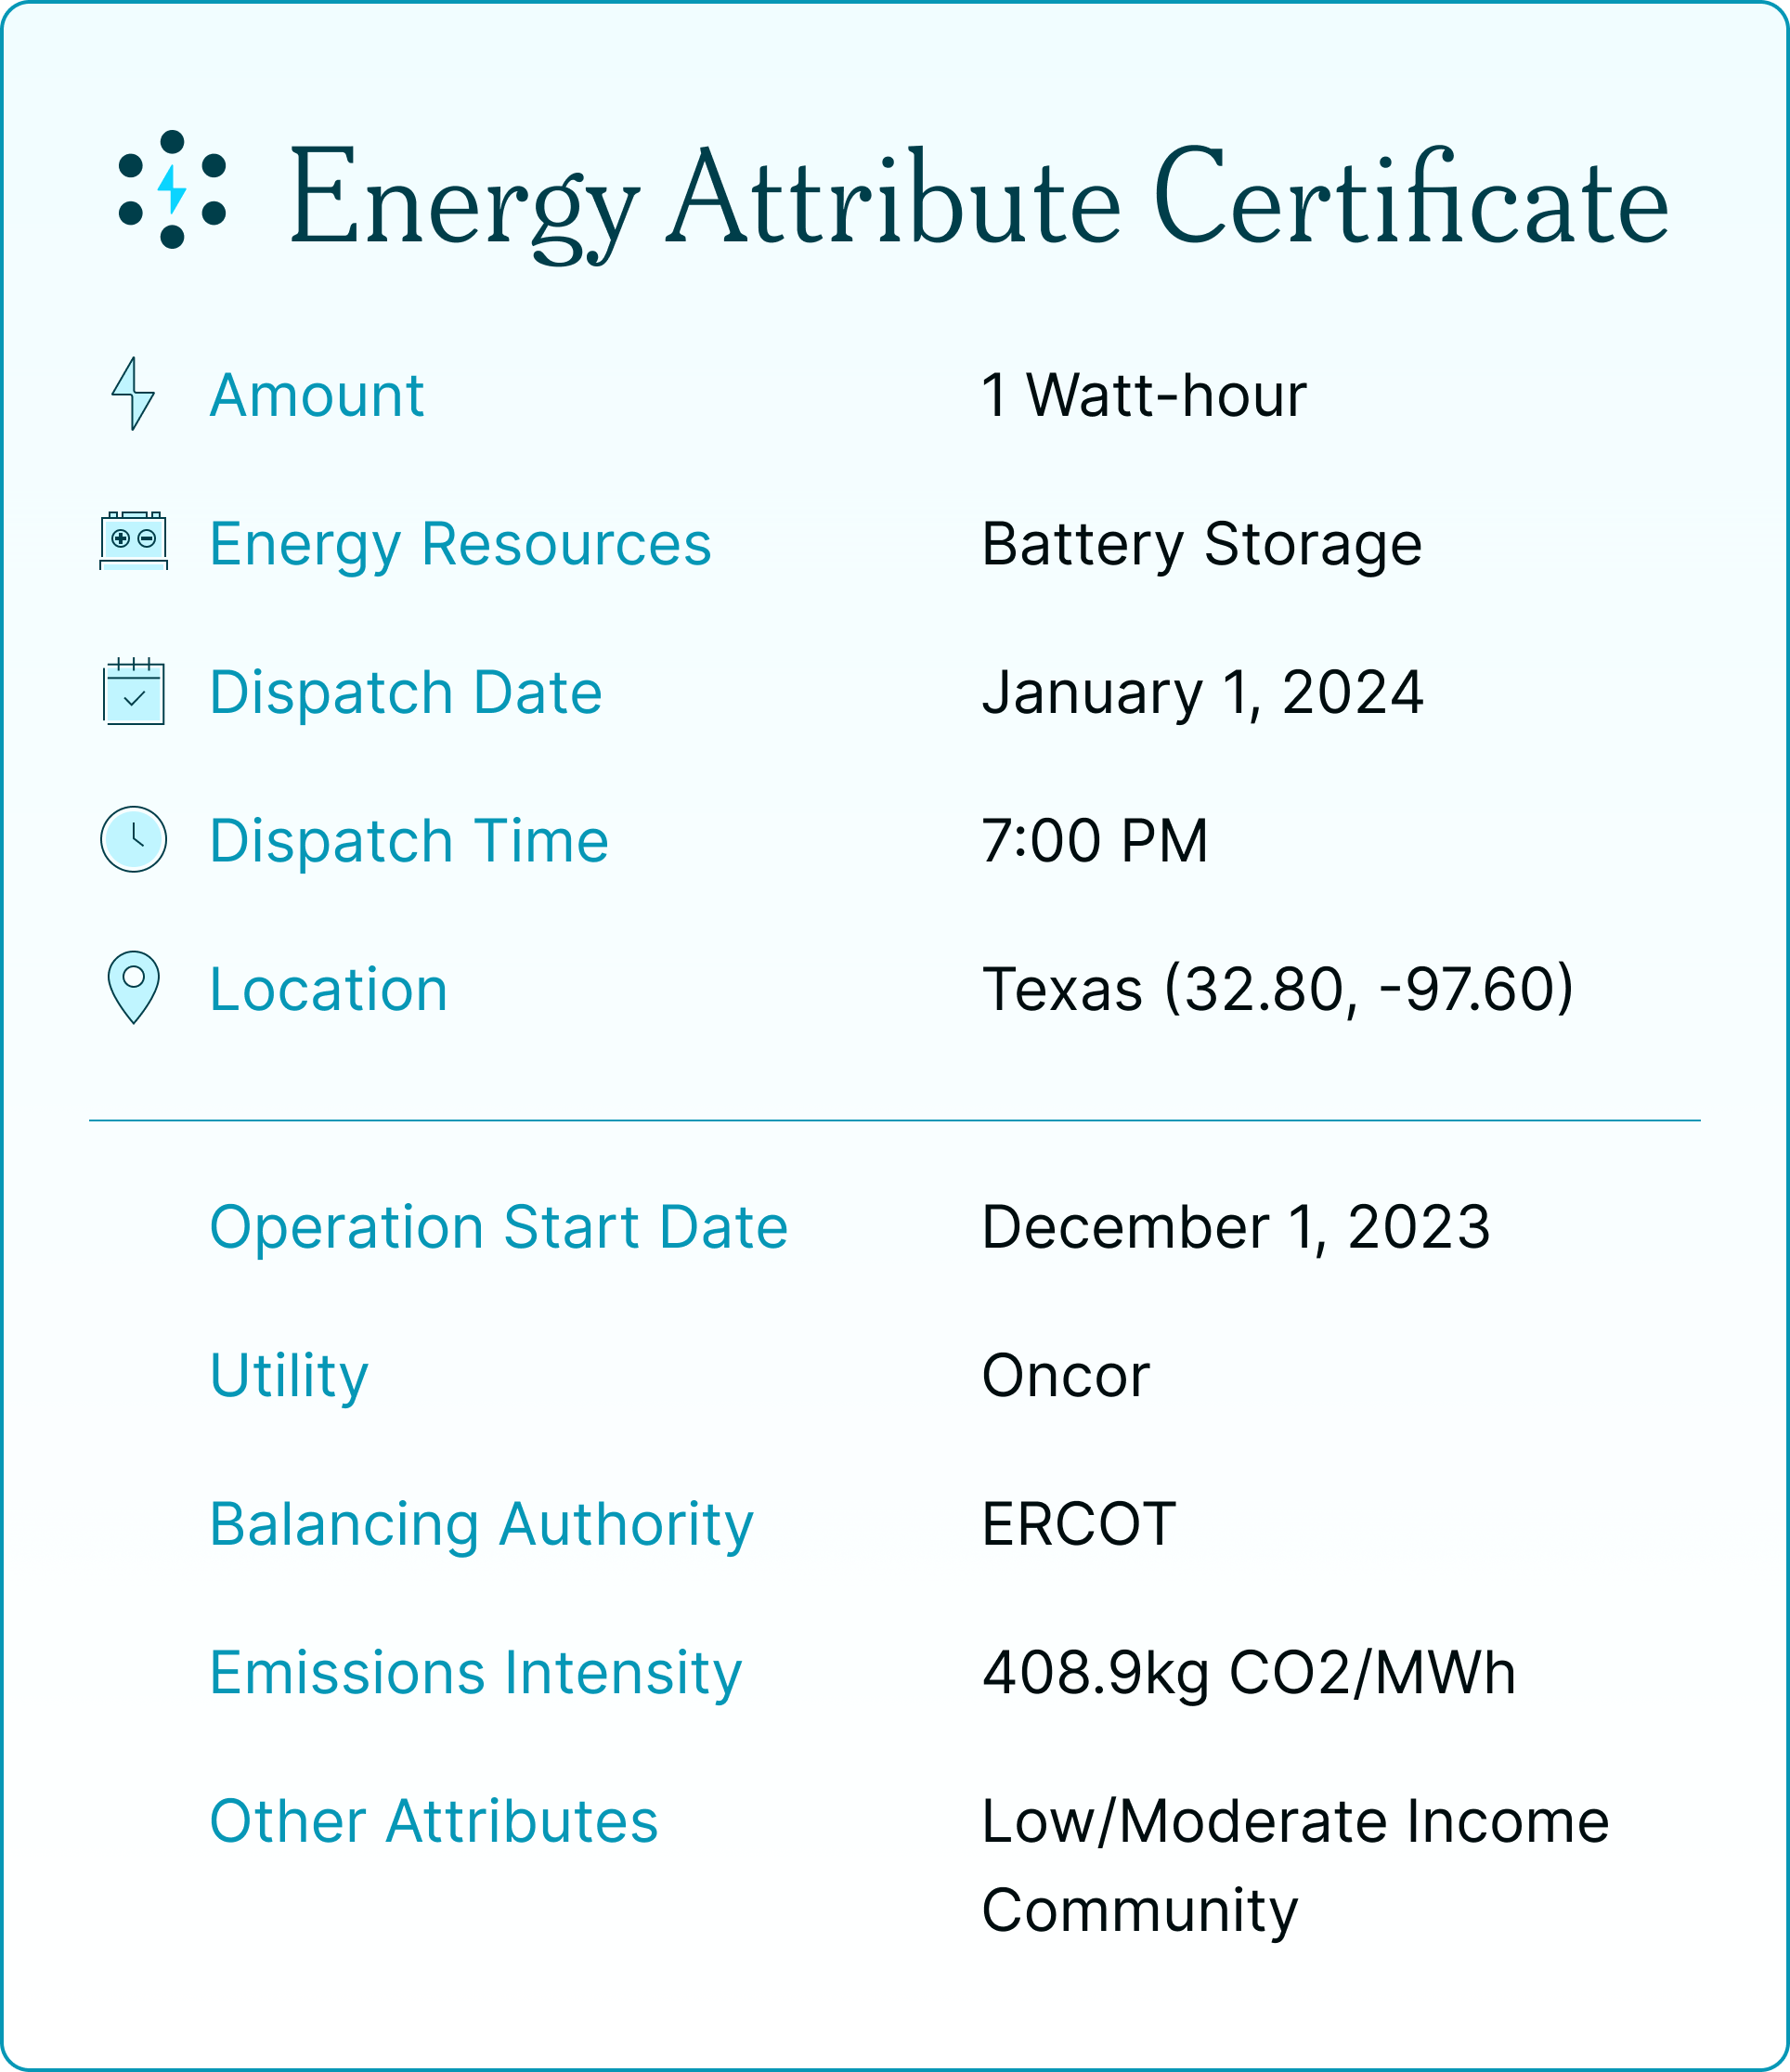 Mockup of an energy attribute certificate. The amount is 1 kilowatt-hour. The energy resource is Battery. The dispatch date is January 1st, 2024. The dispatch time is 7PM. The location is Texas, with coordinates 32.80 North 97.60 West.  . The operation start date is December 1, 2023. The utility is Oncor. The balancing authority is ERCOT. The emissions intensity is 408.9 kilograms CO2 per Megawatt-hour. Other attributes are Low/Moderate Income Community.